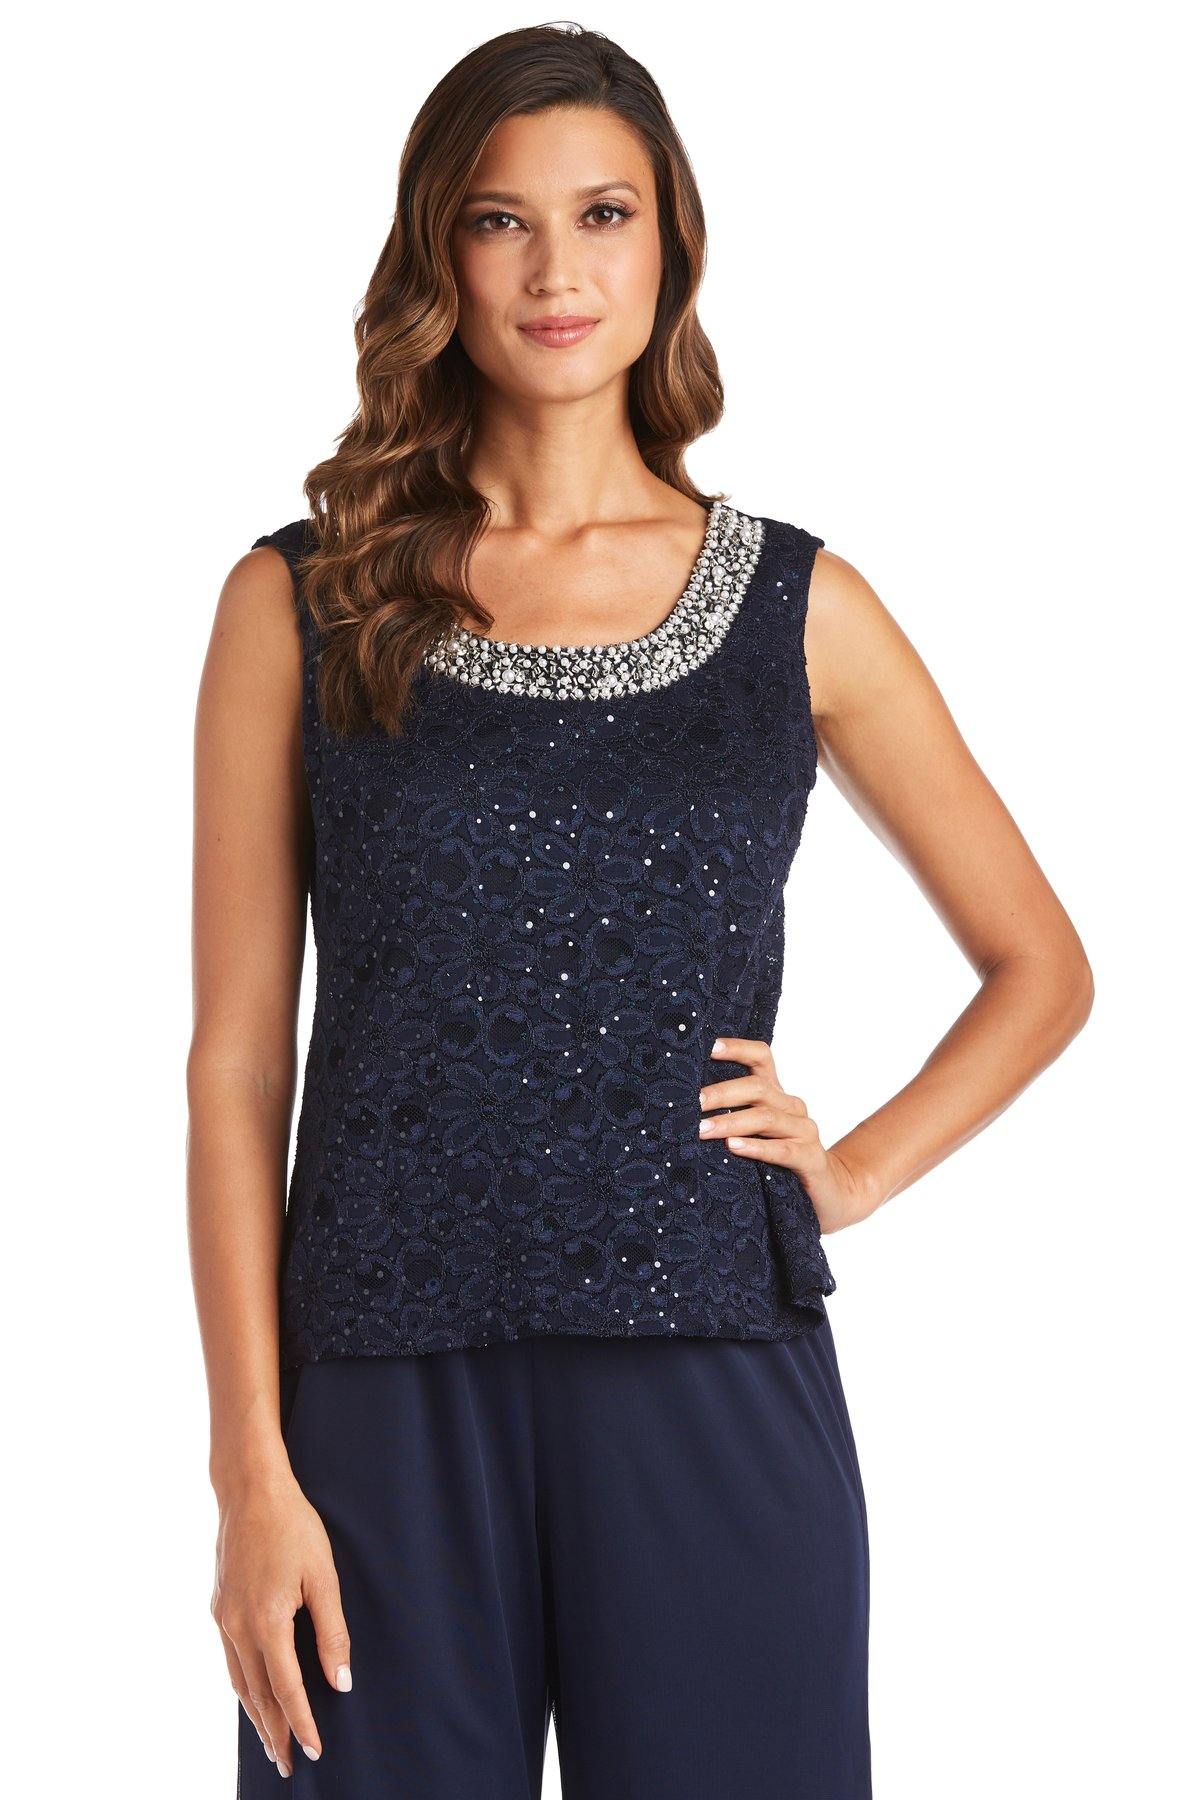 R&M Richards Two Piece Set Beaded Top 5988 - The Dress Outlet